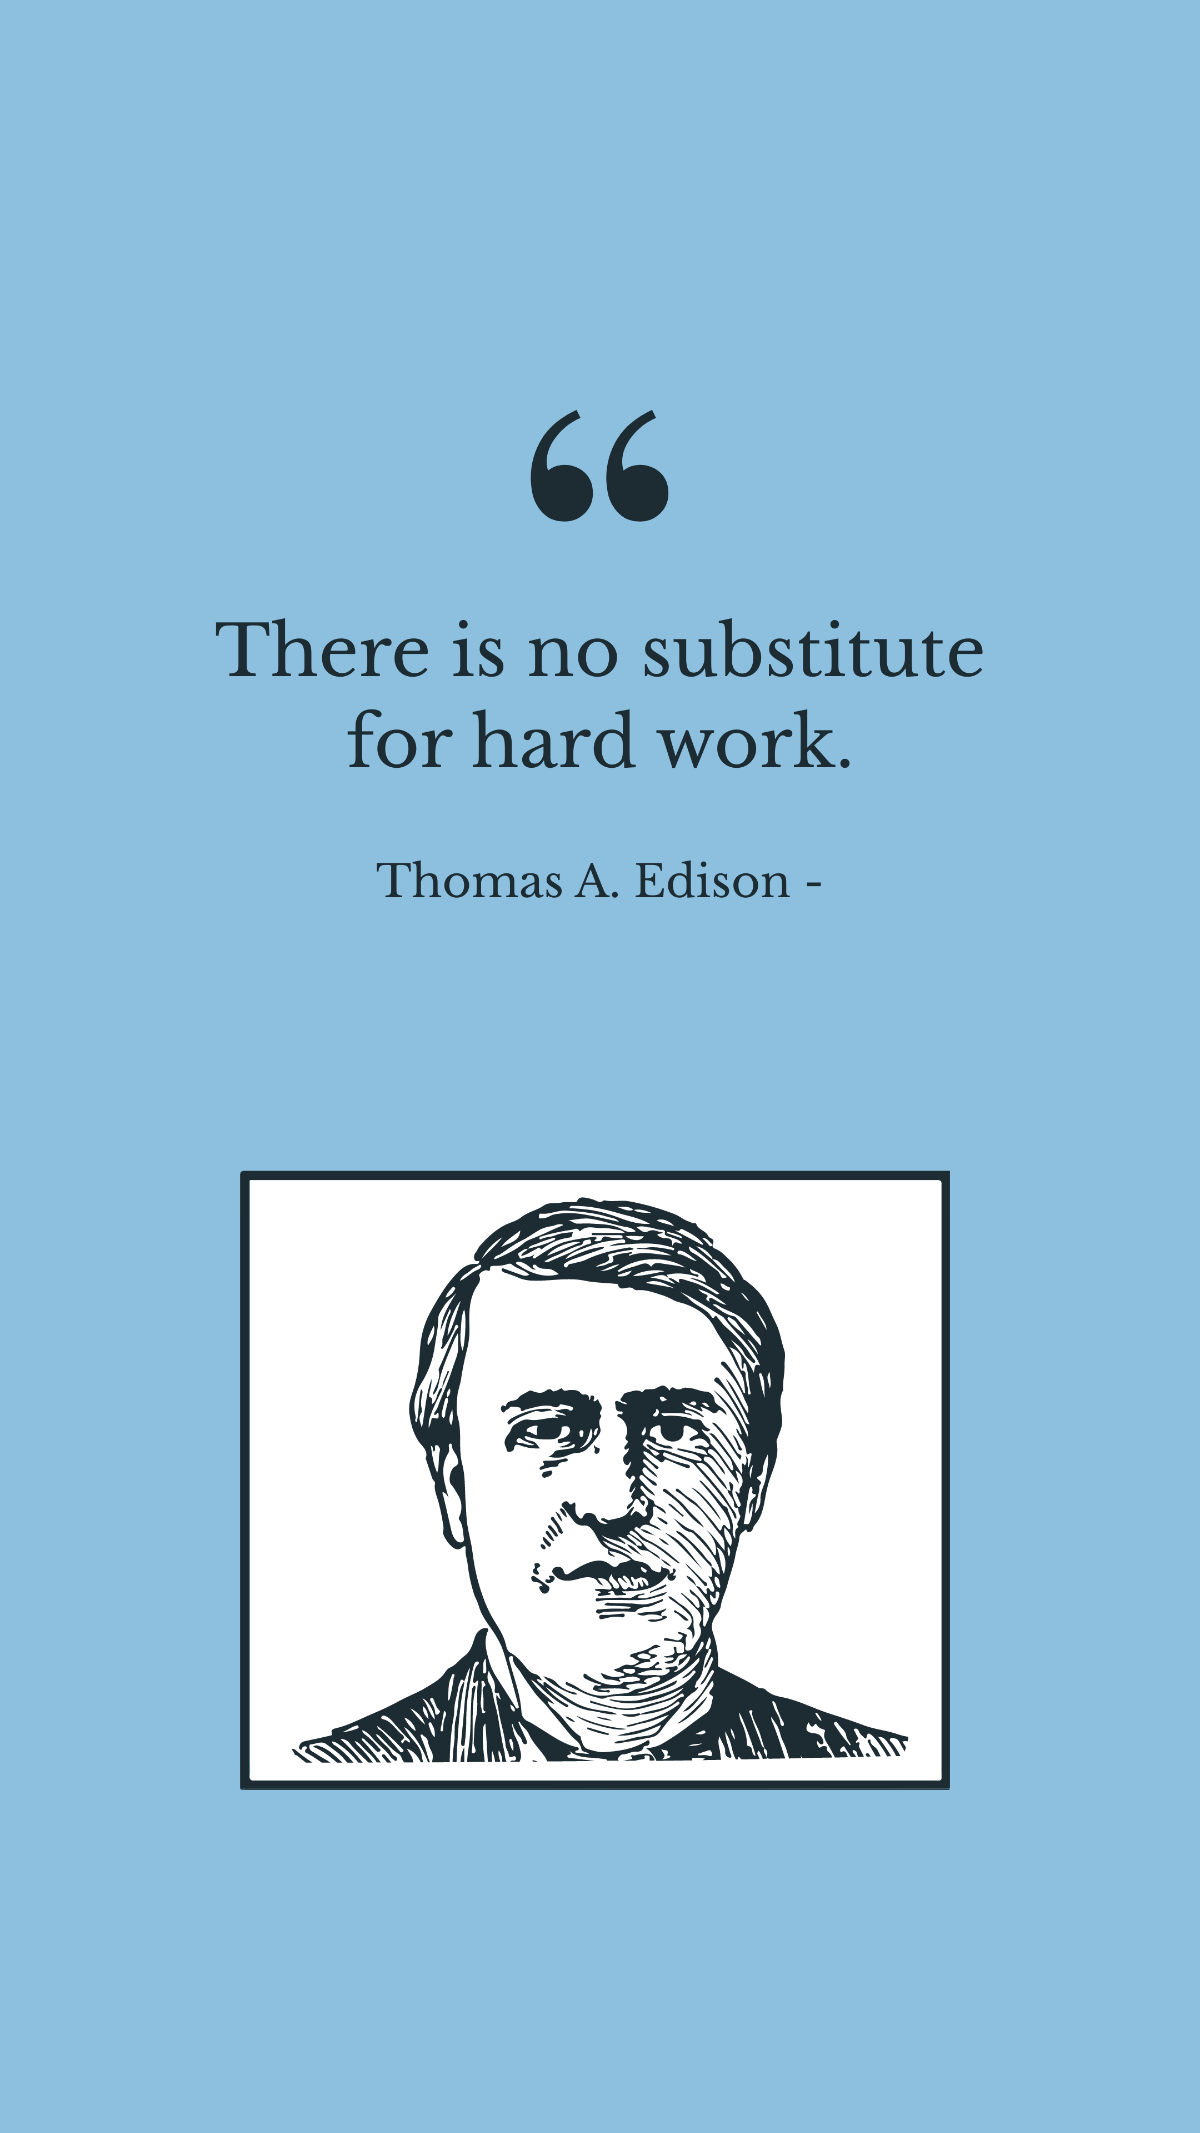 Thomas A. Edison - There is no substitute for hard work.